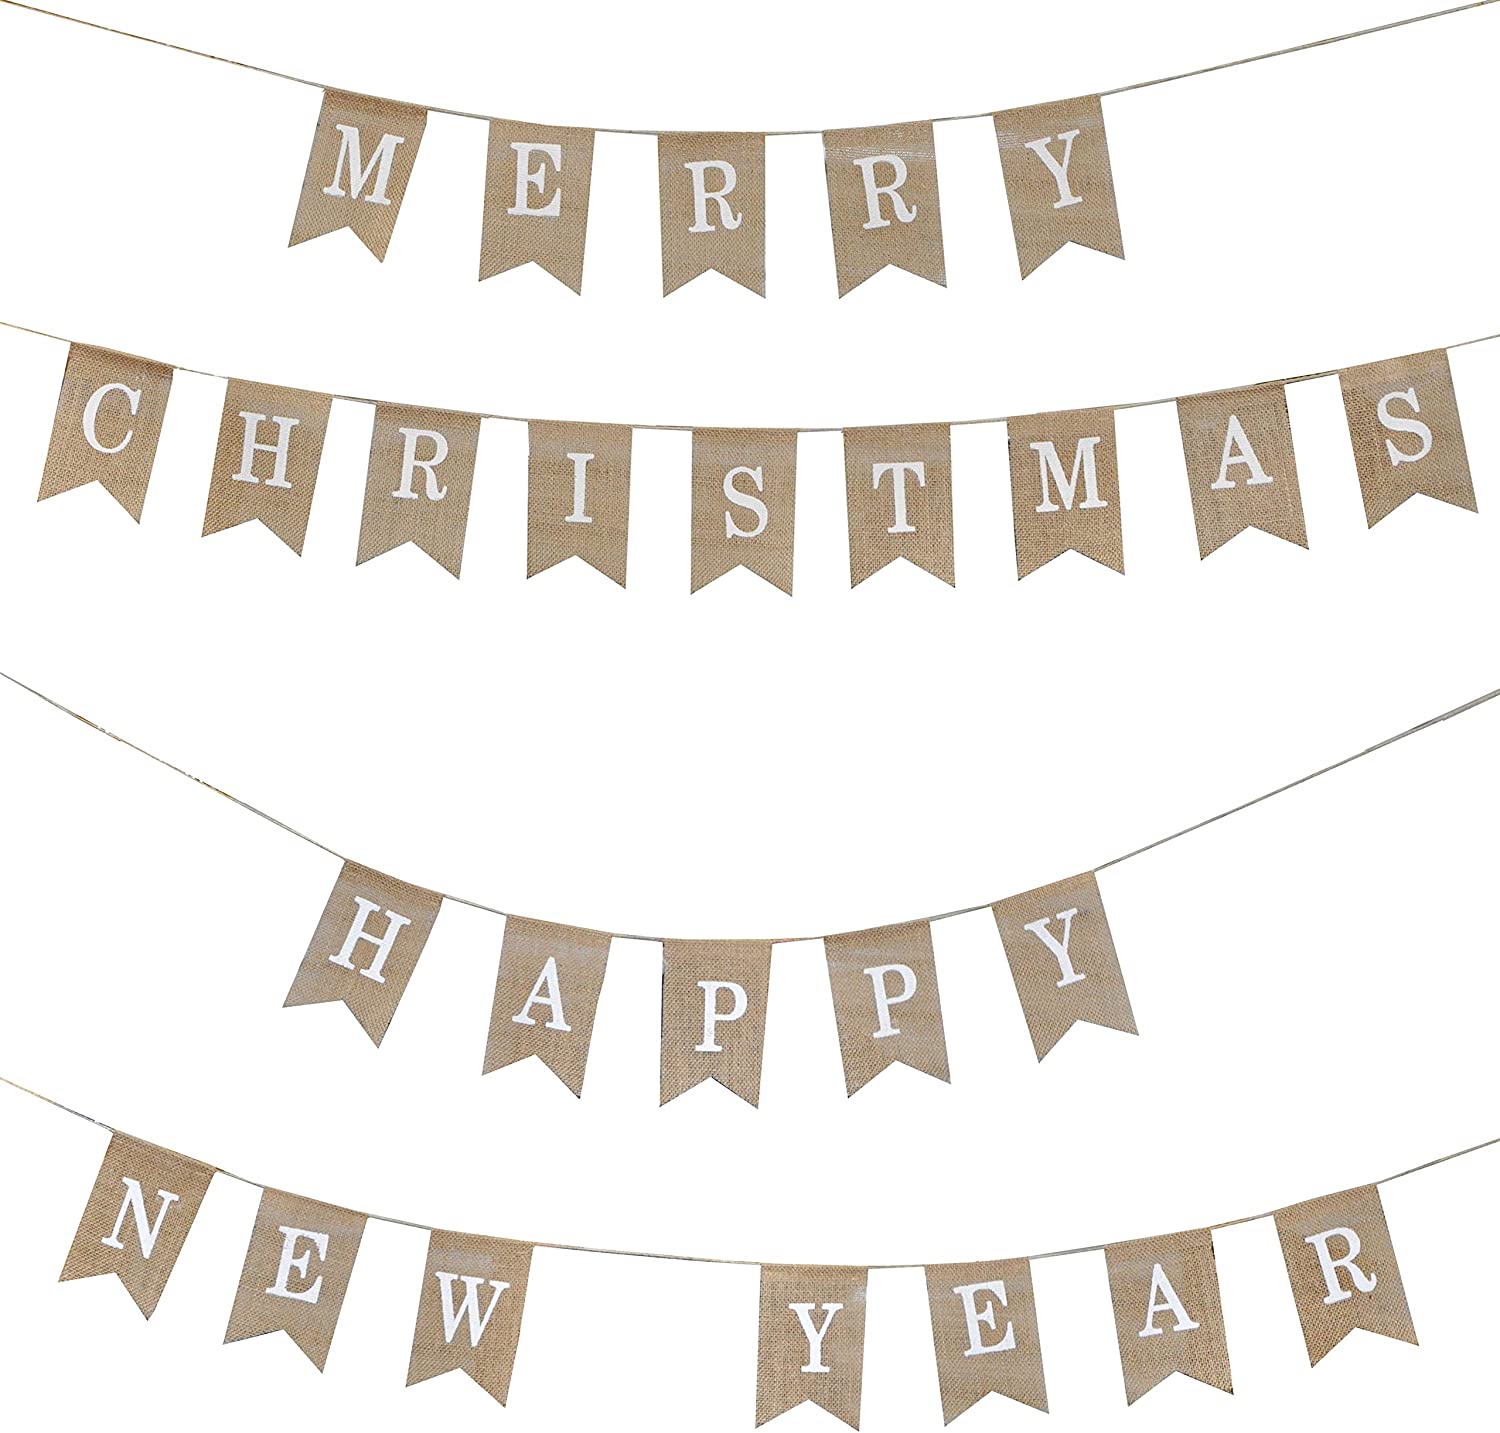 Mandala Crafts Merry Christmas Banner, Happy New Year Banner from Burlap, Fabric Pennant Bunting String, Pendant Flags Party Decoration